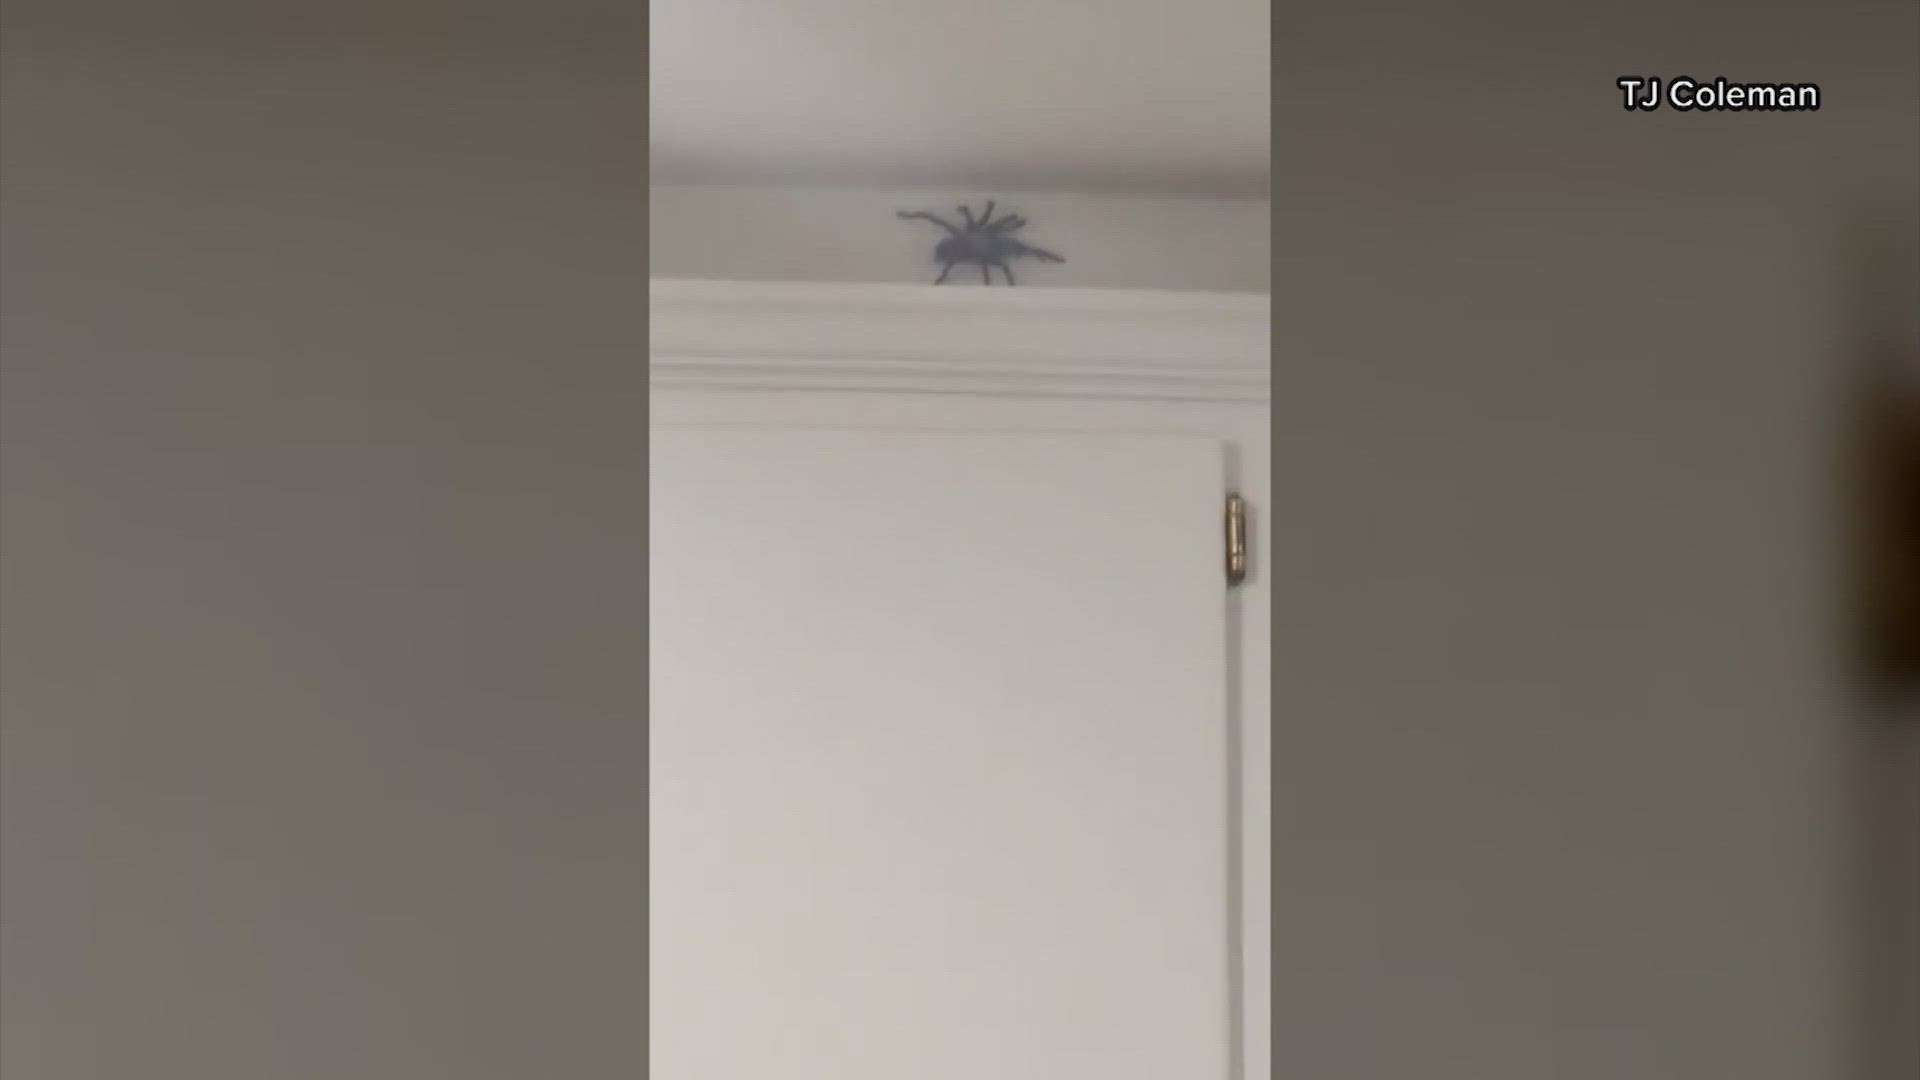 Videos are popping up all over social media showing spiders inside homes in Temple, Texas. Some of them are as big as your hand!